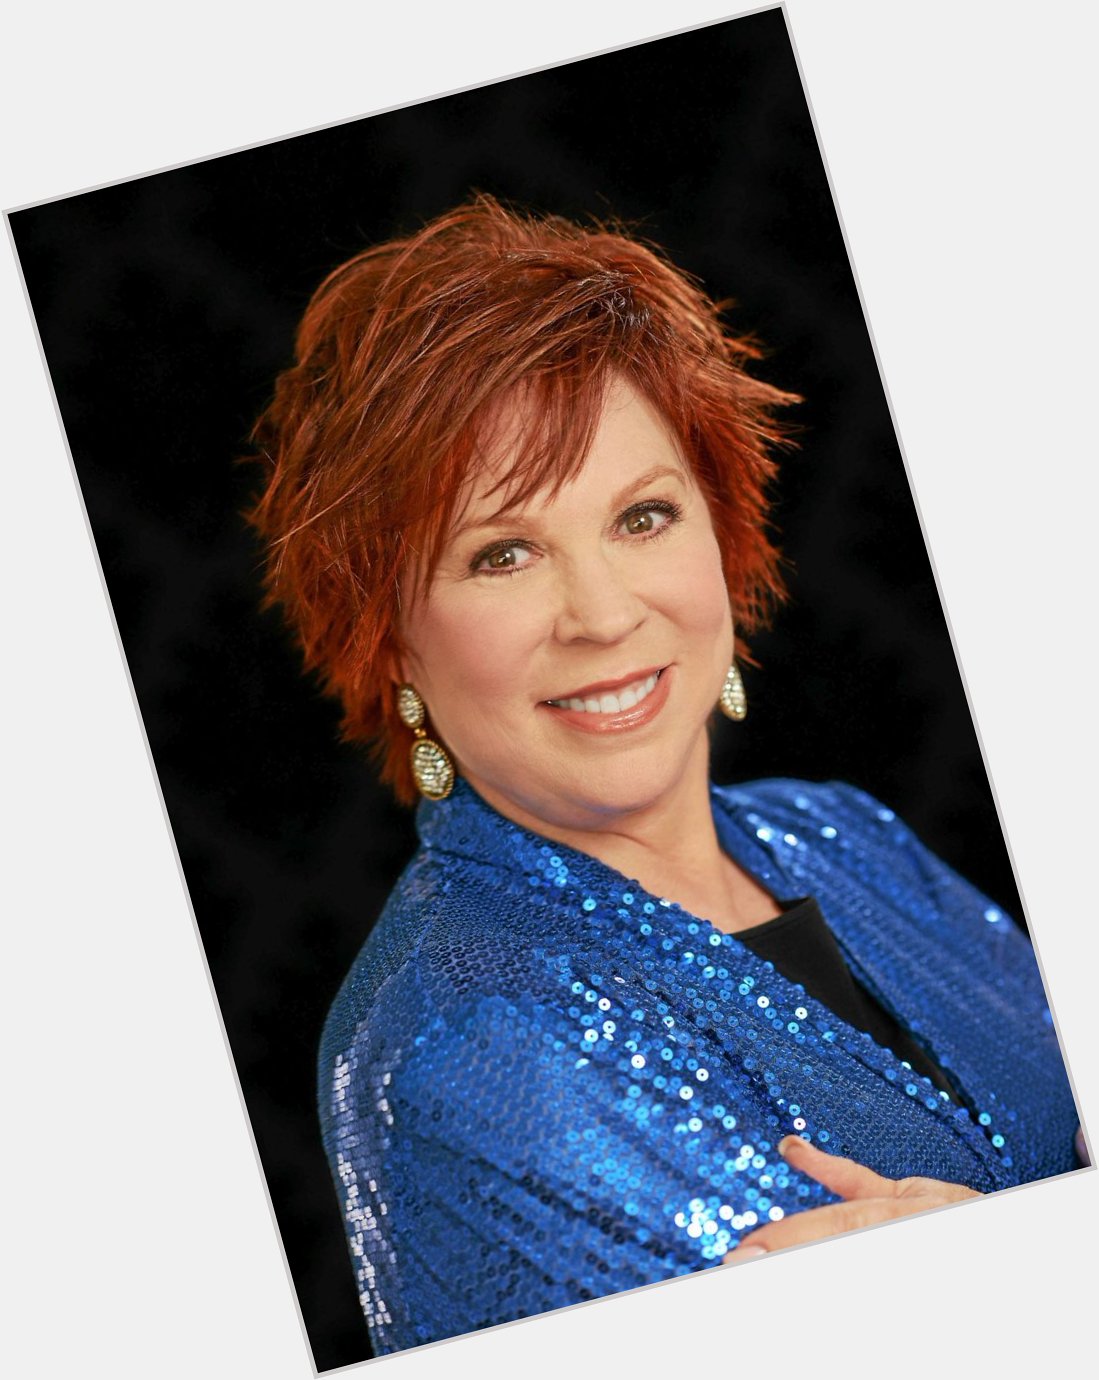 HAPPY BIRTHDAY to VICKI LAWRENCE this March 26th! 